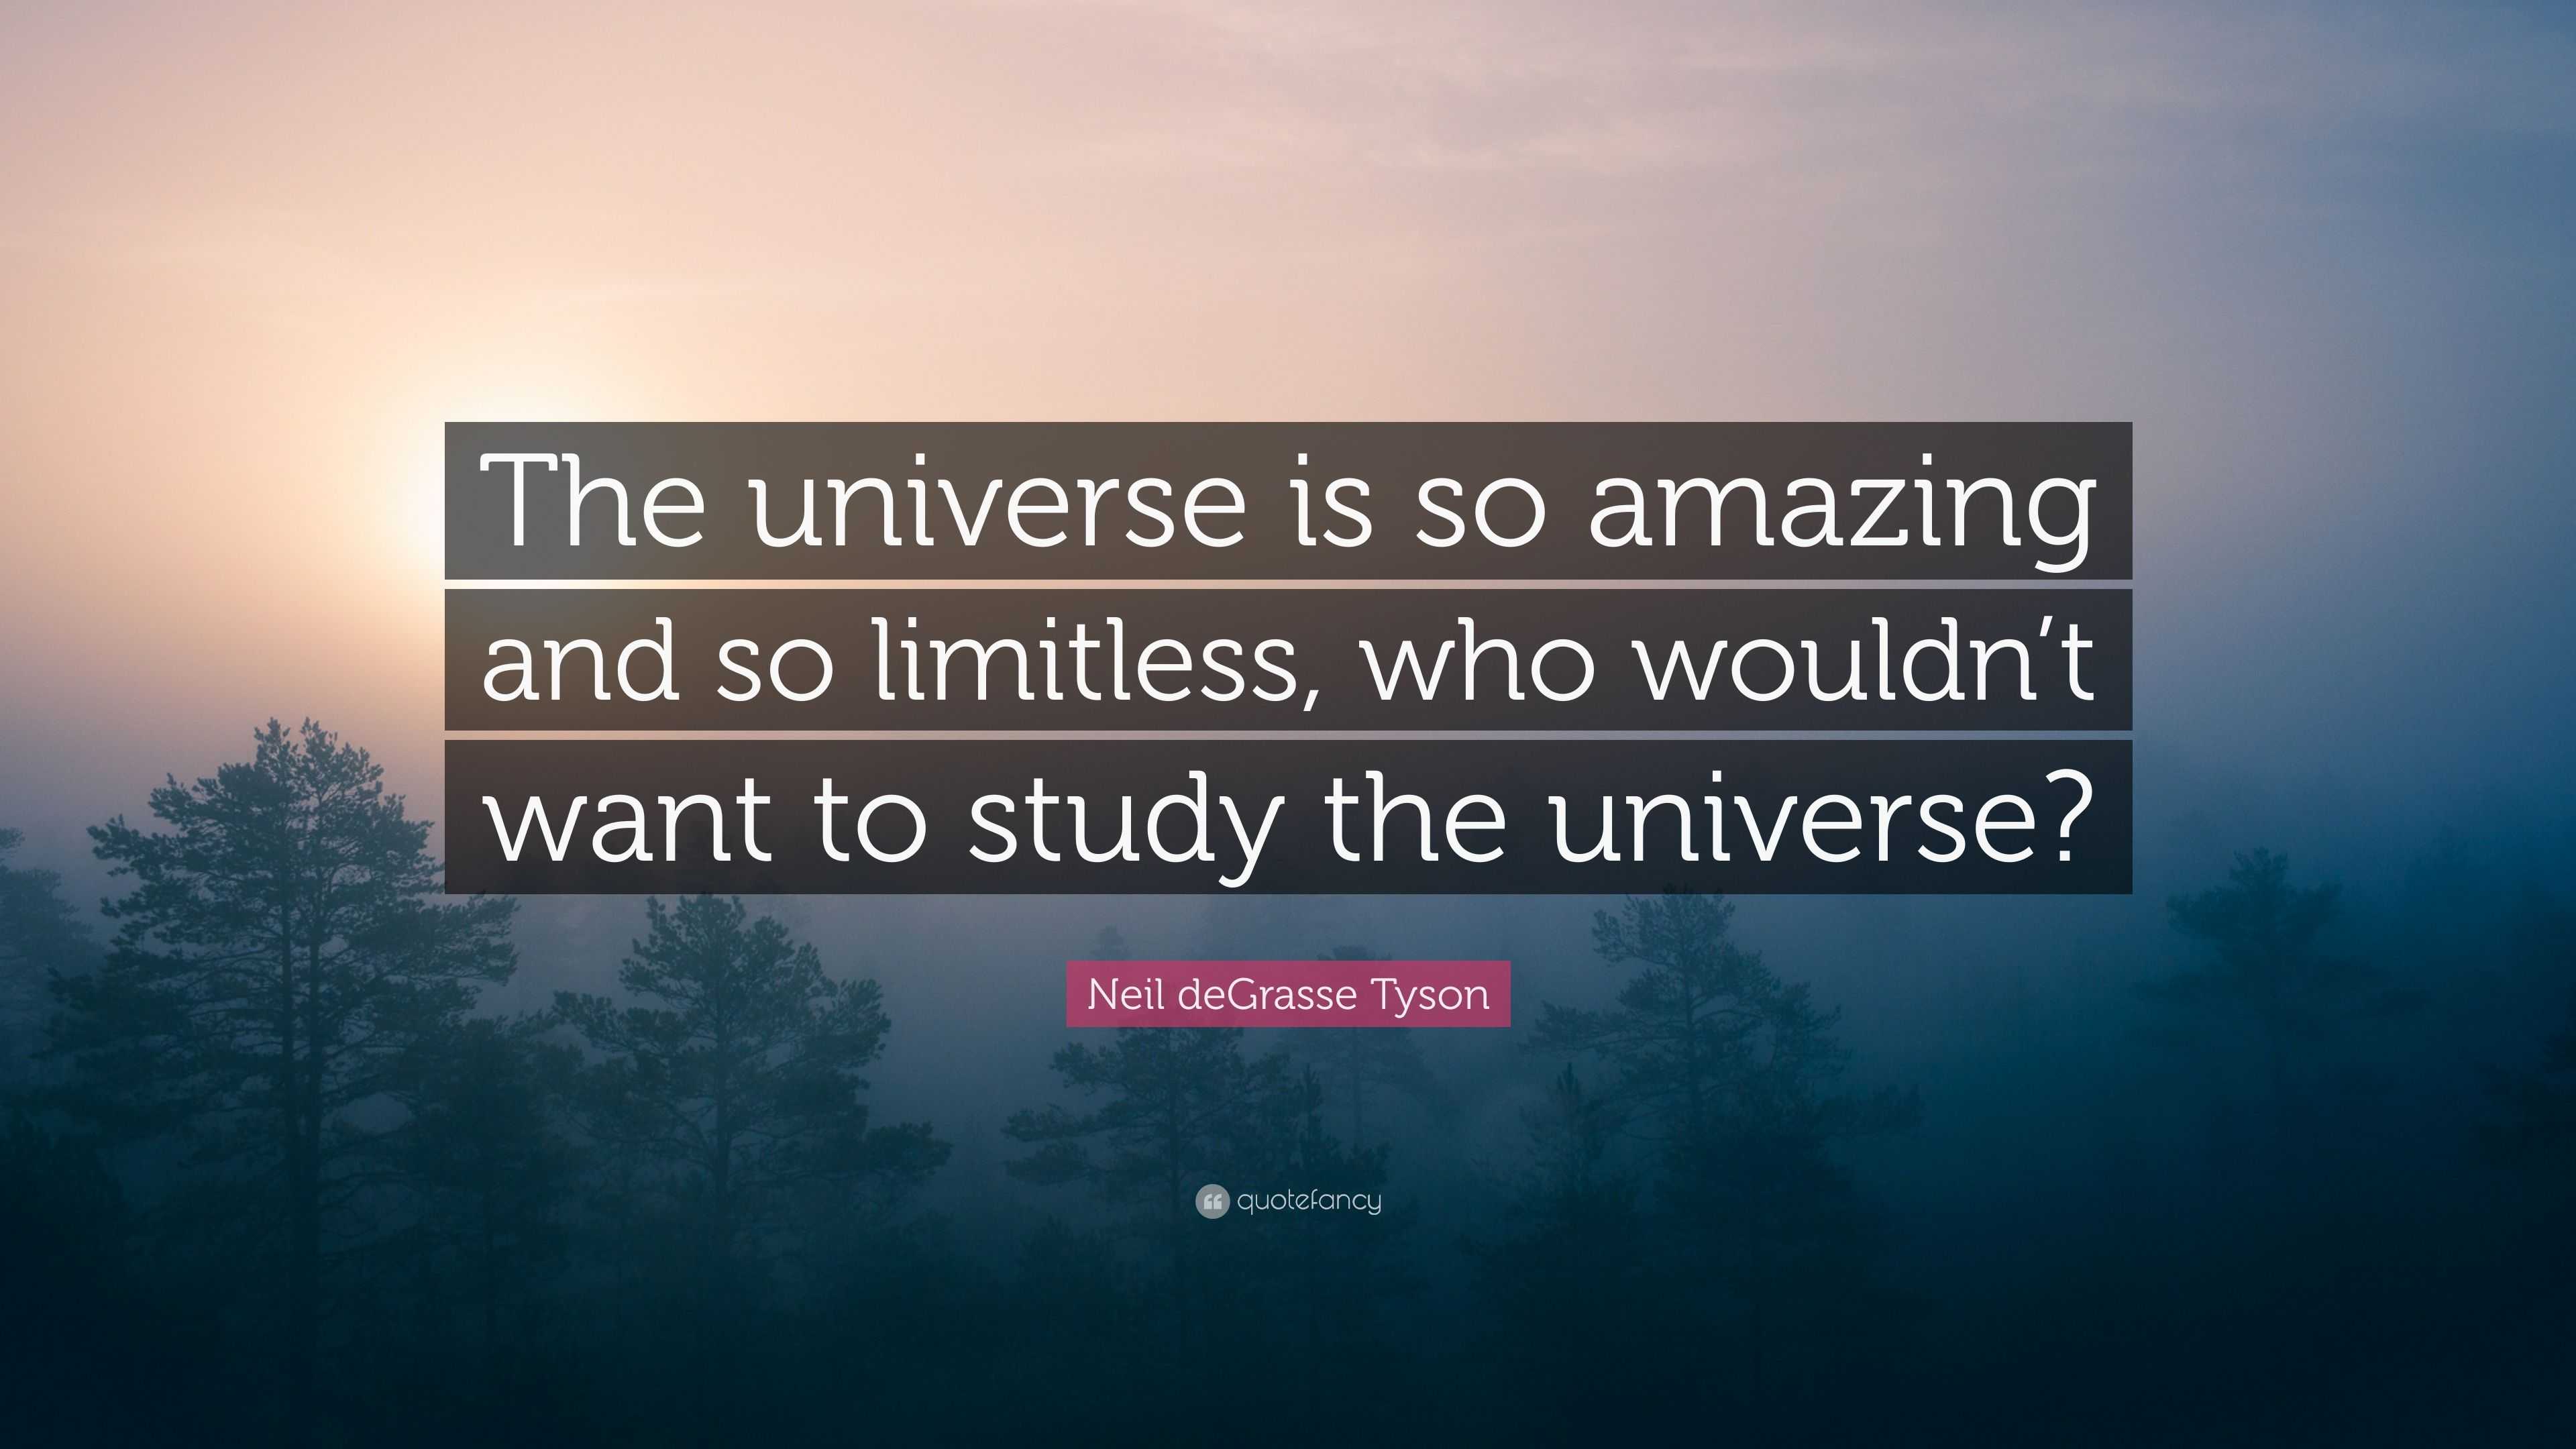 Neil deGrasse Tyson Quote: “The universe is so amazing and so limitless ...